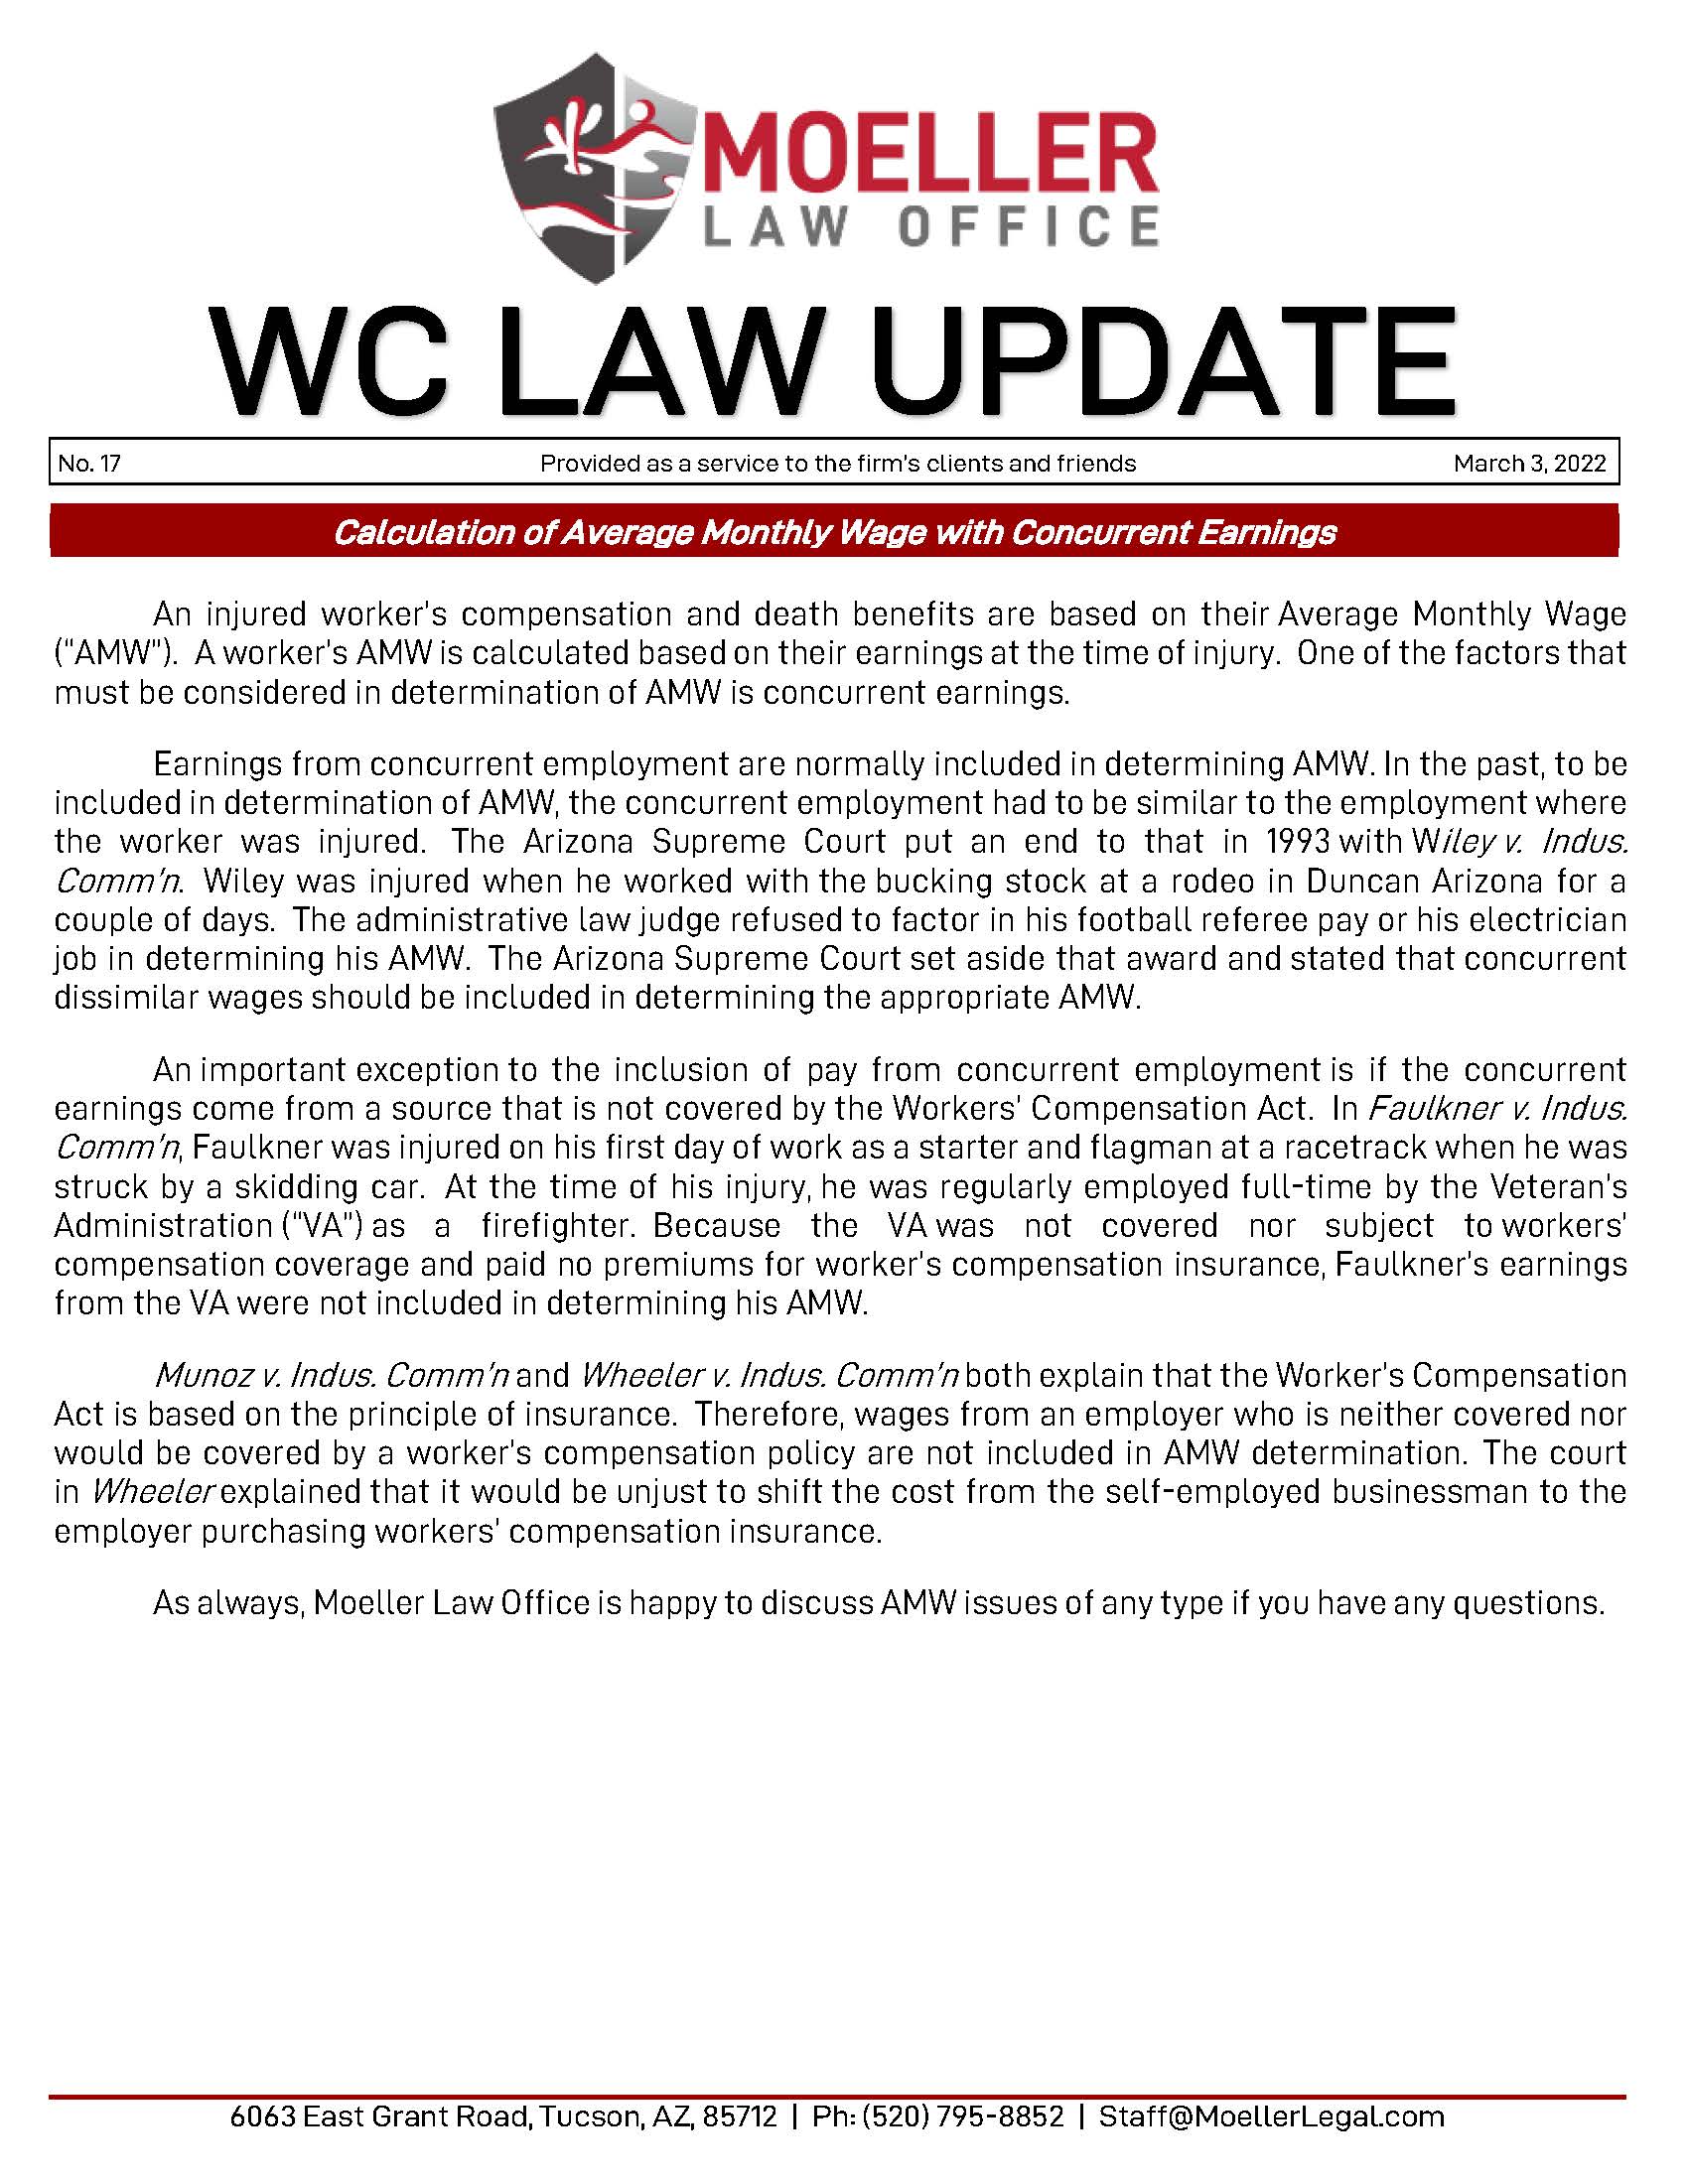 2022 03 03 – No. 17 – WC Law Update – Calculation of AMW with Concurrent Earnings